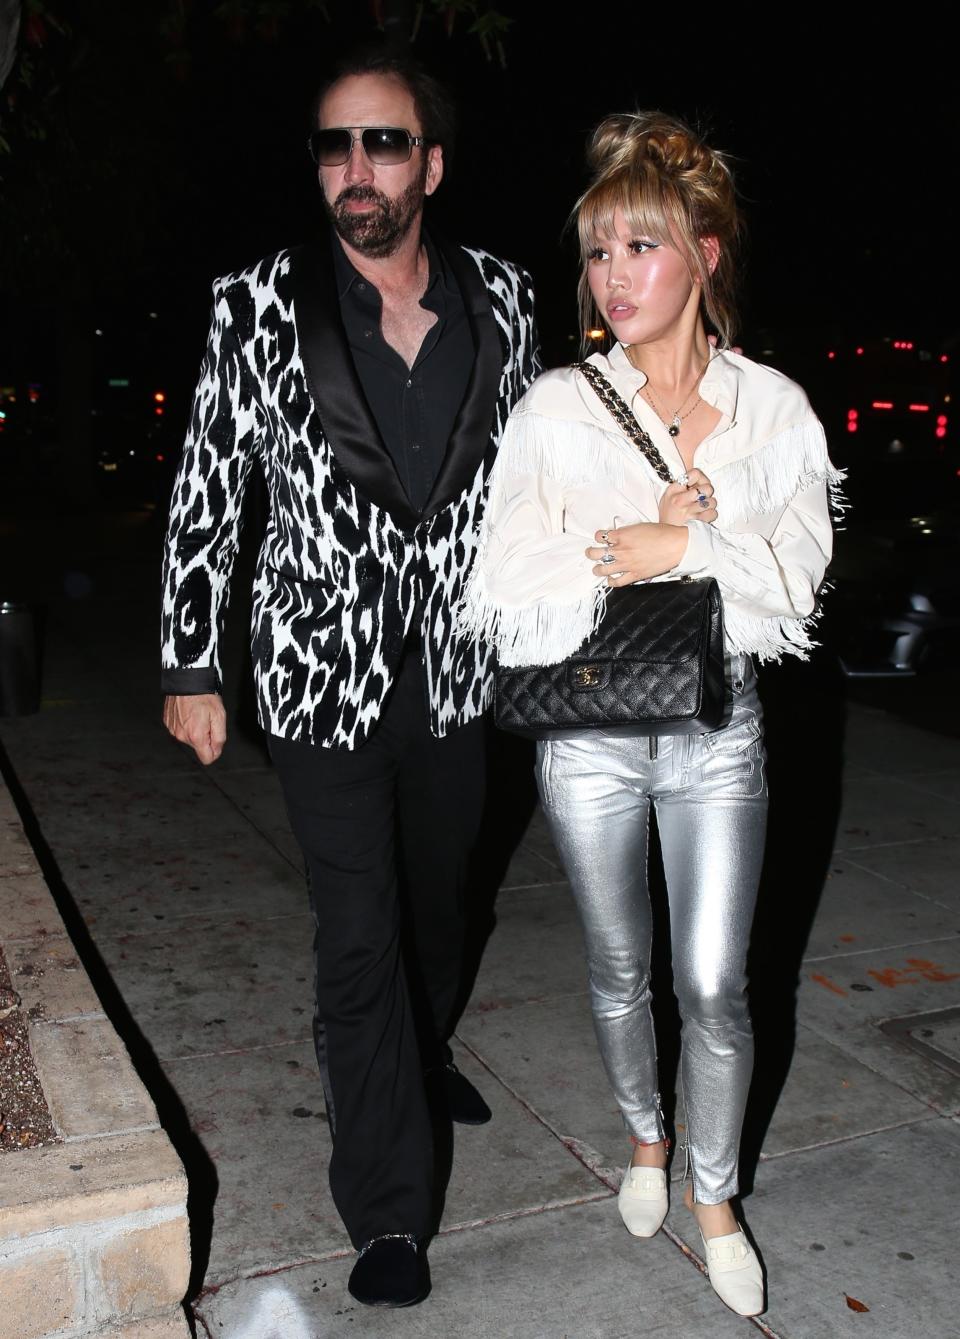 Nicolas Cage with his soon-to-be ex-wife Erika Koike. photo: BACKGRID